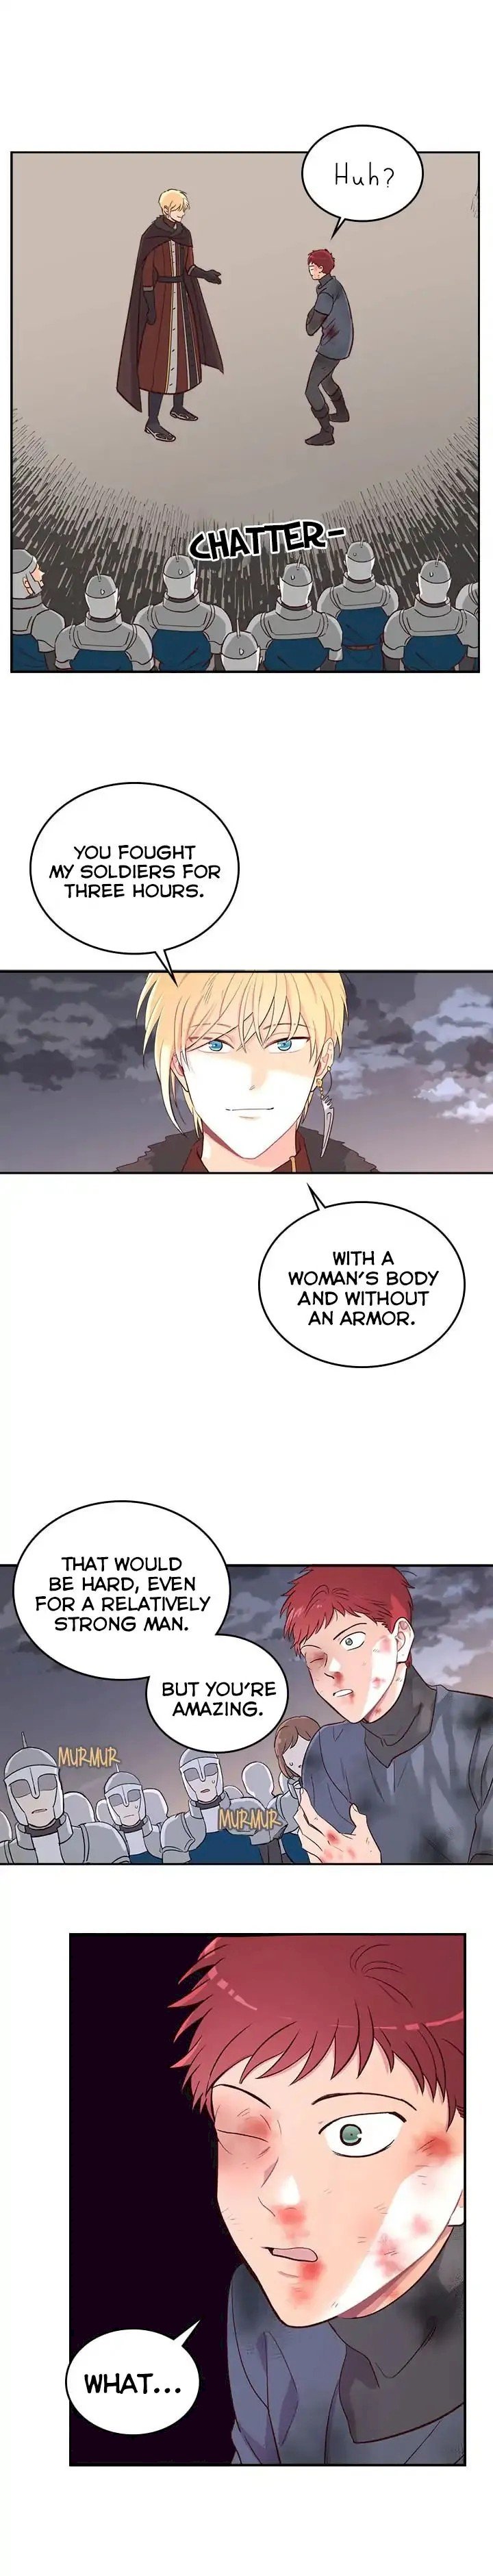 emperor-and-the-female-knight-chap-7-4